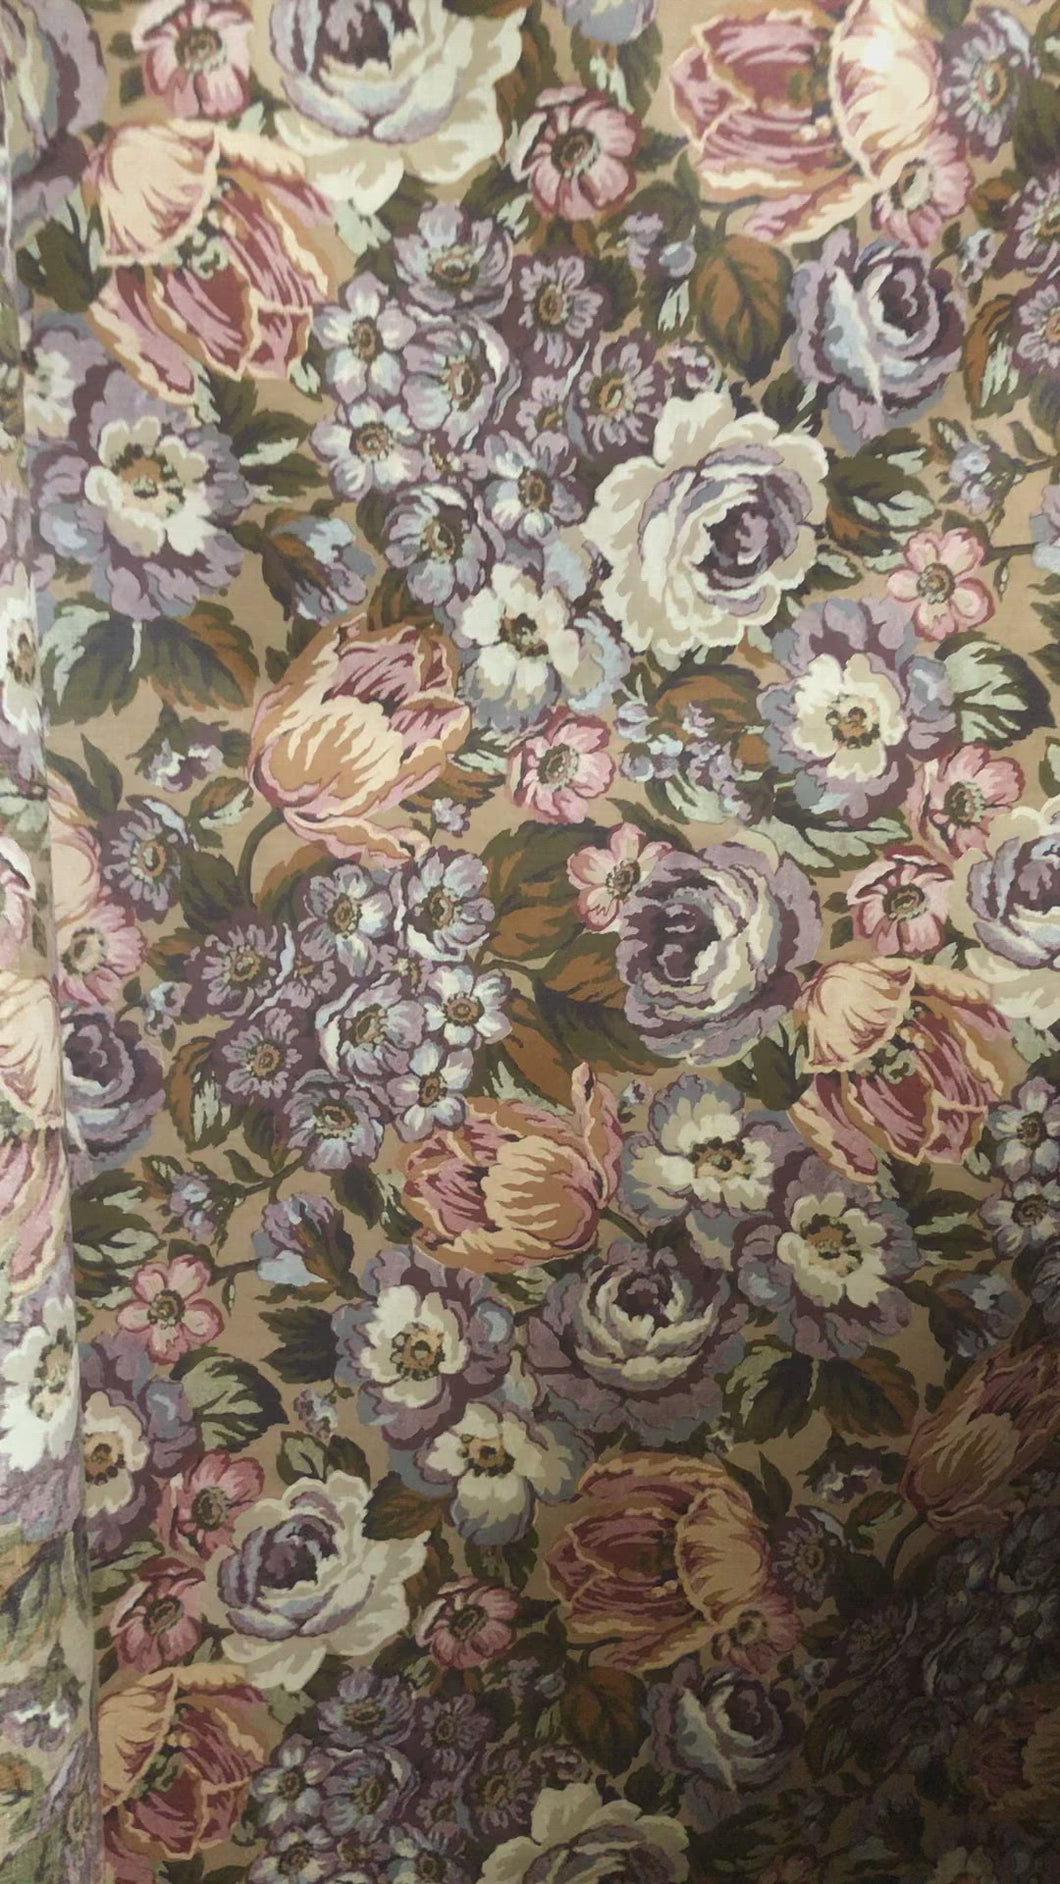 HOME DECOR FABRIC WITH FLOWERS ALL OVER $3.00/YARD